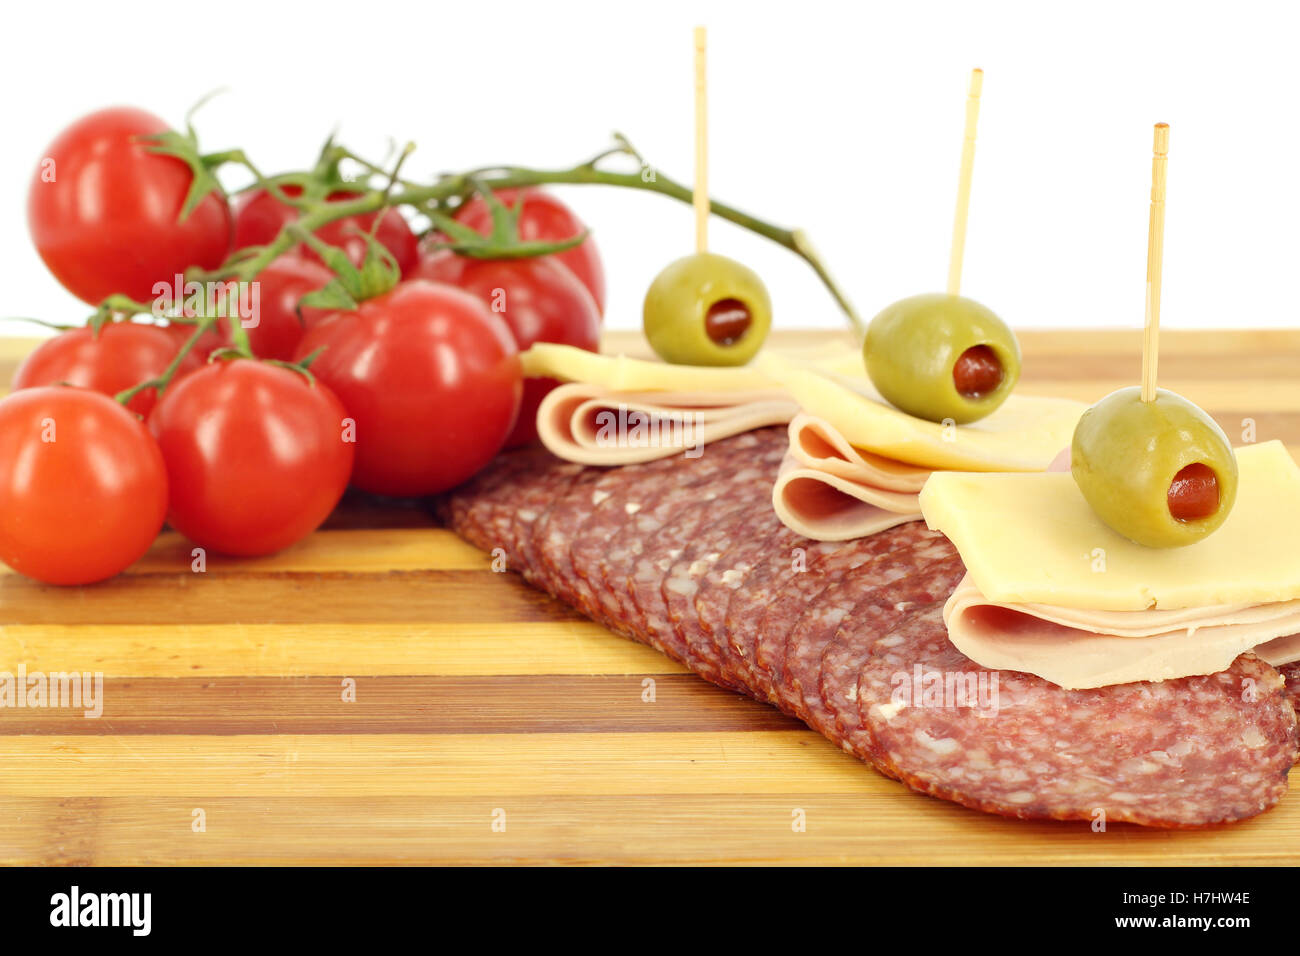 salami cheese olives and tomatoes Stock Photo